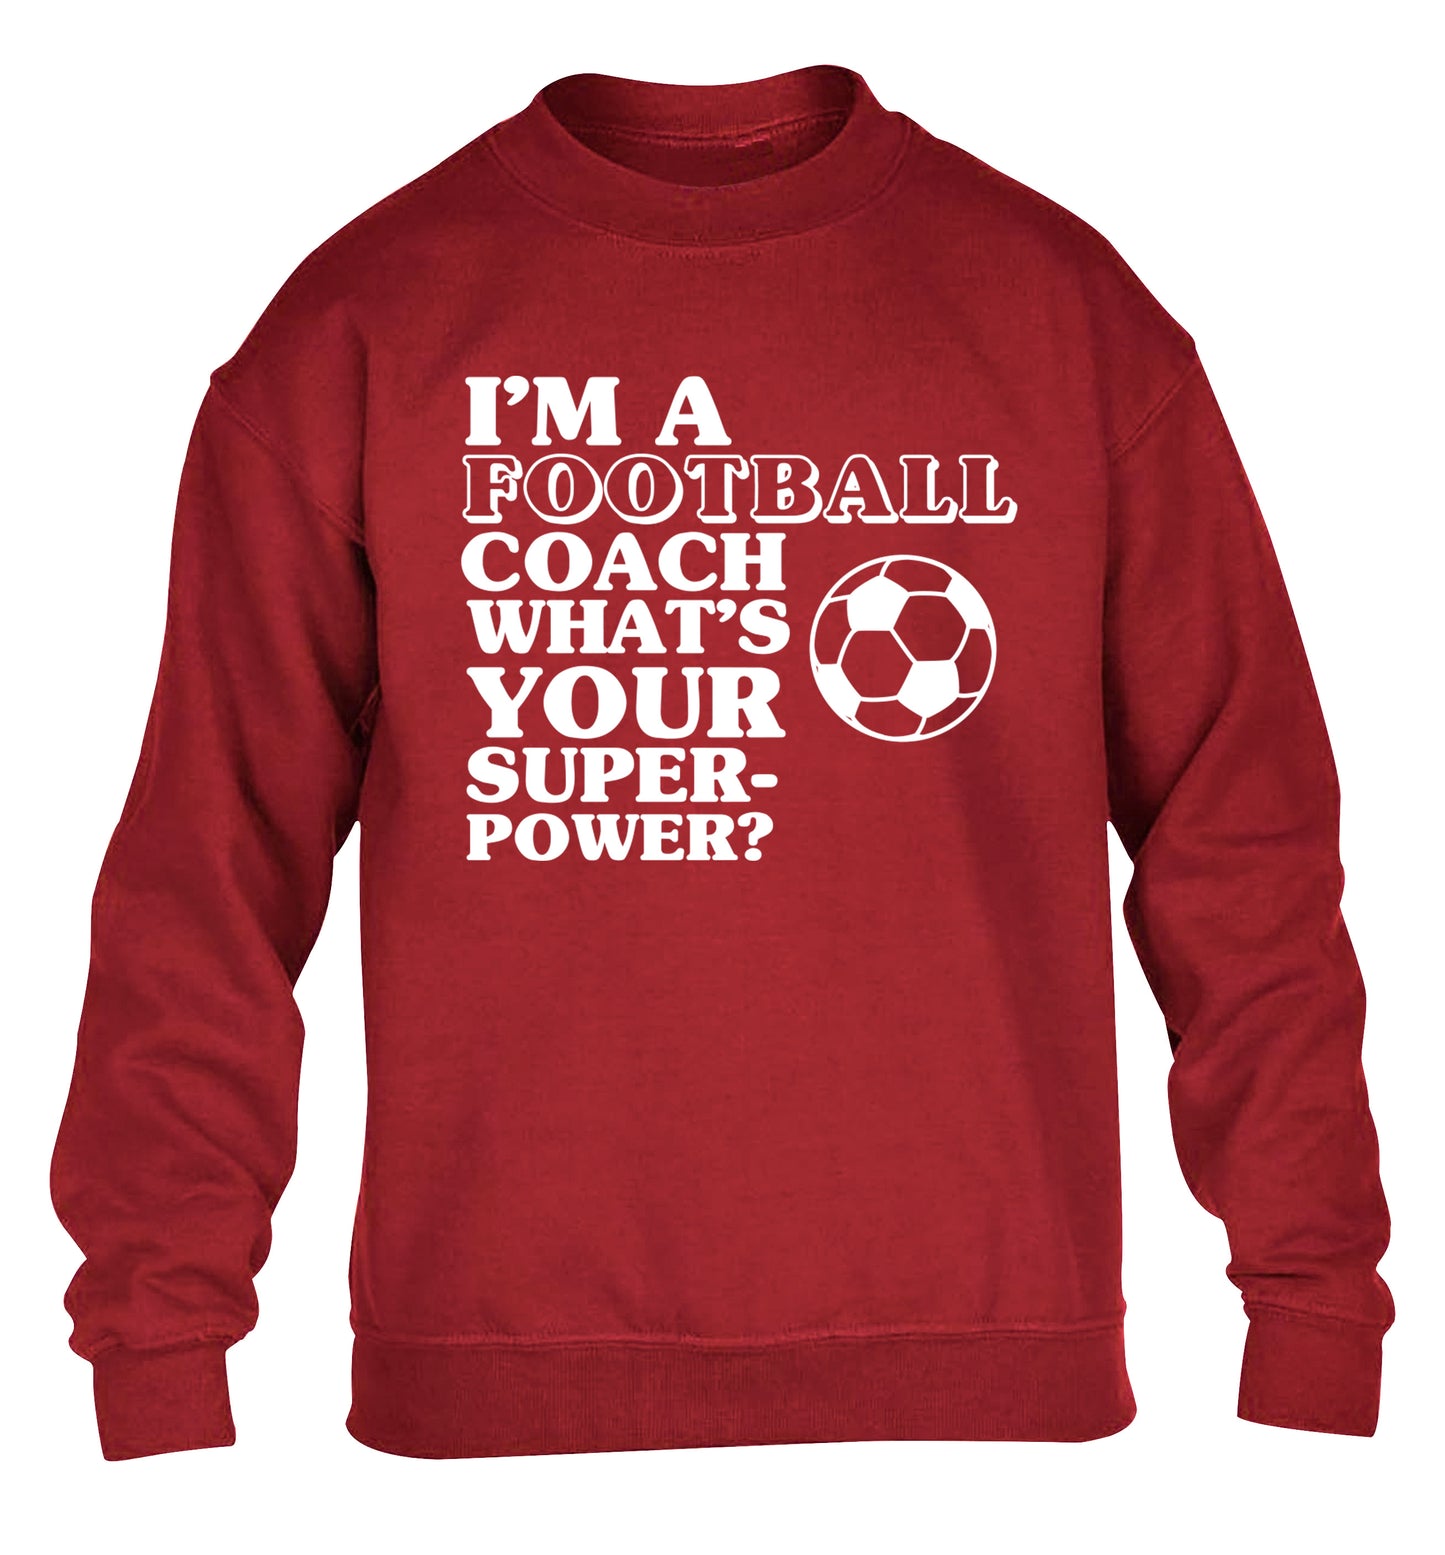 I'm a football coach what's your superpower? children's grey sweater 12-14 Years